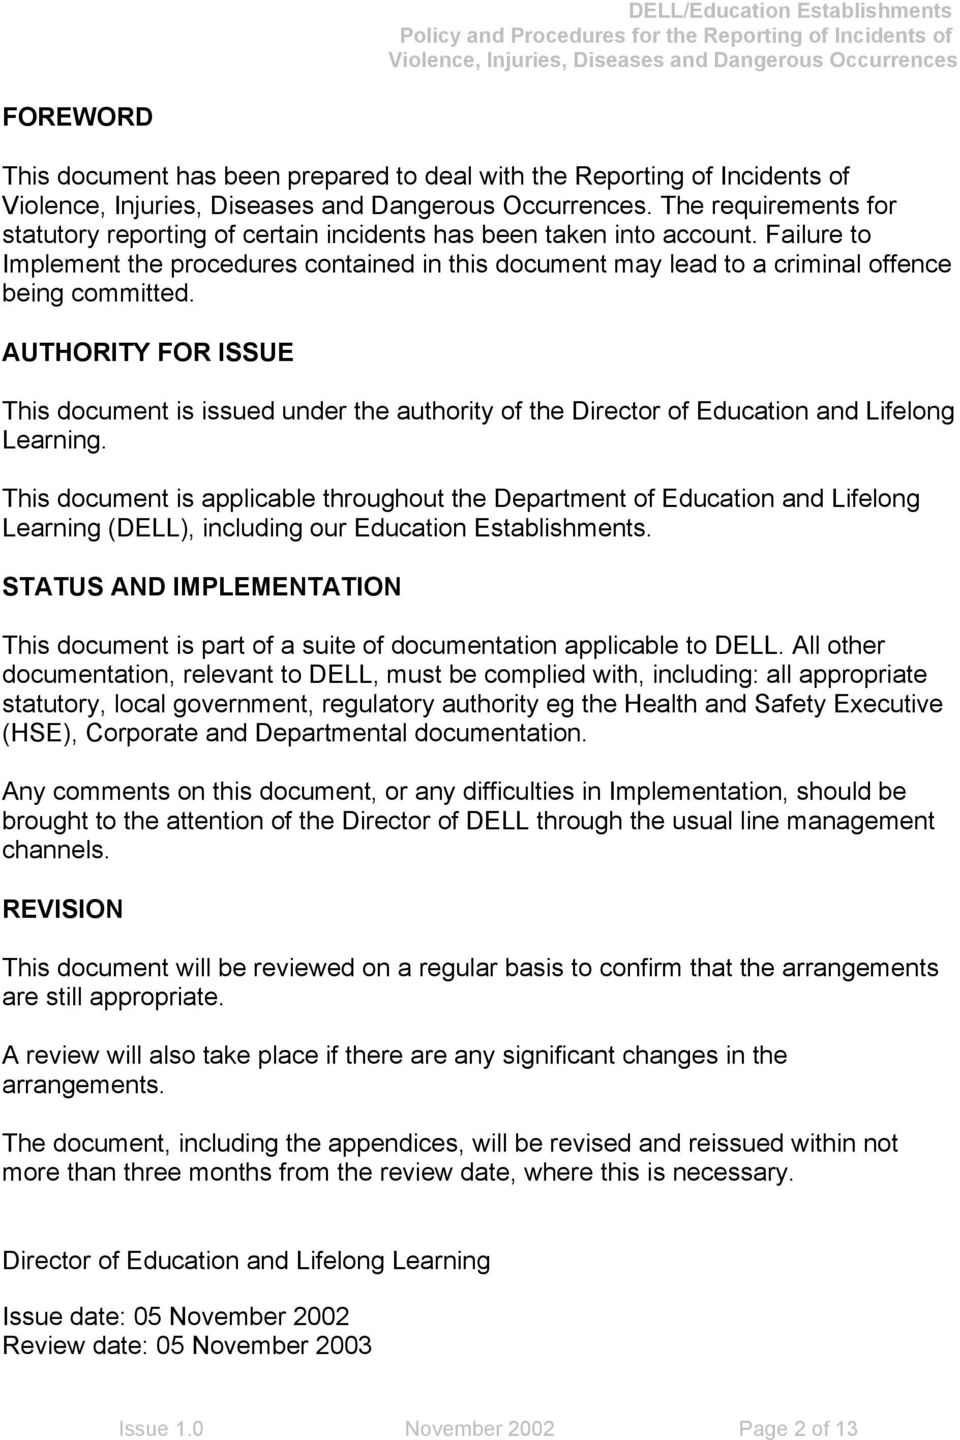 AUTHORITY FOR ISSUE This document is issued under the authority of the Director of Education and Lifelong Learning.